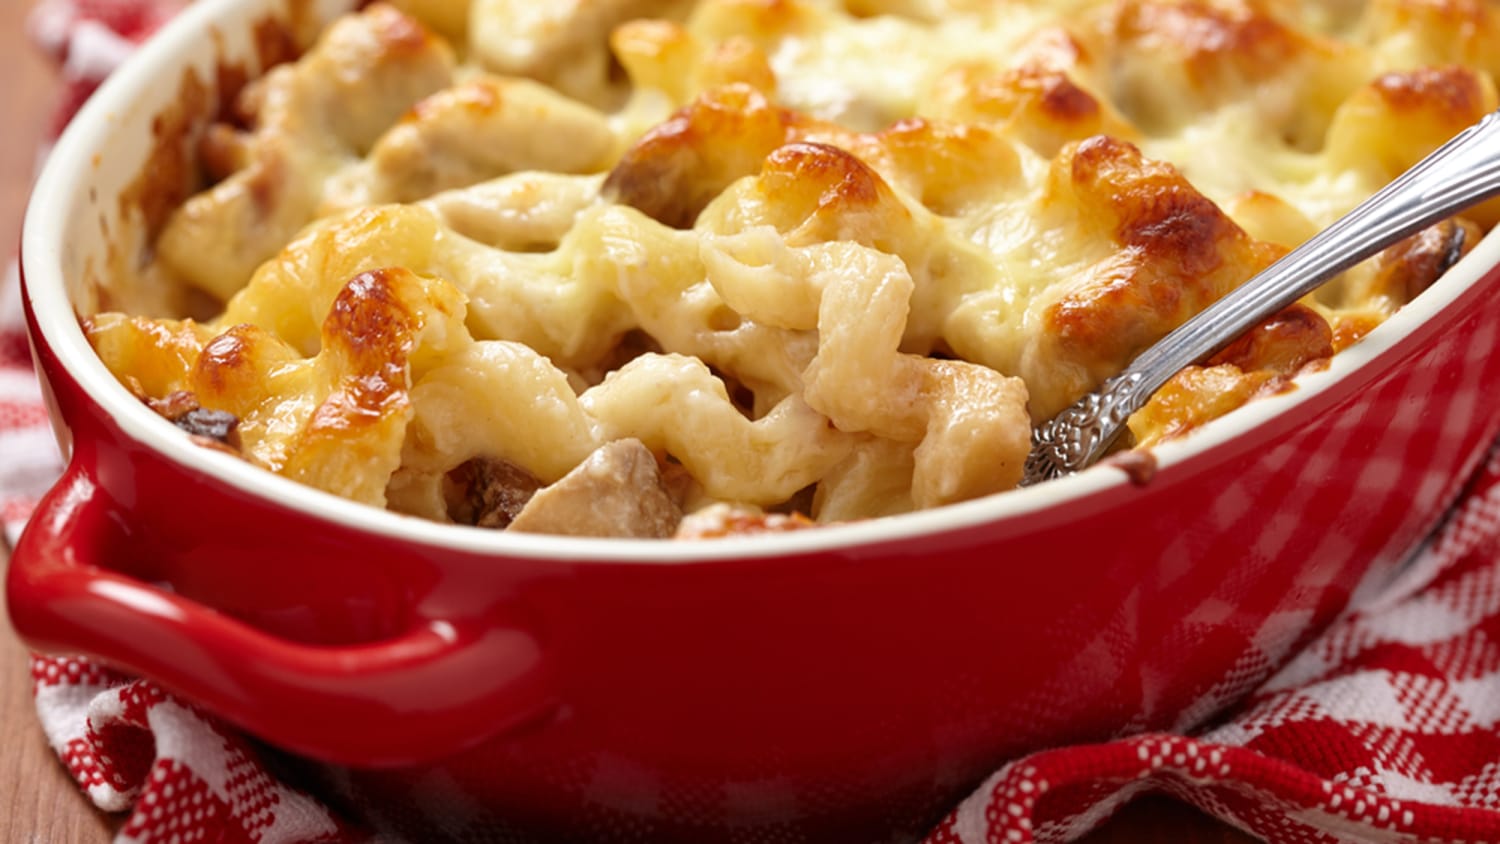 One-Pan No-Boil Baked Macaroni and Cheese